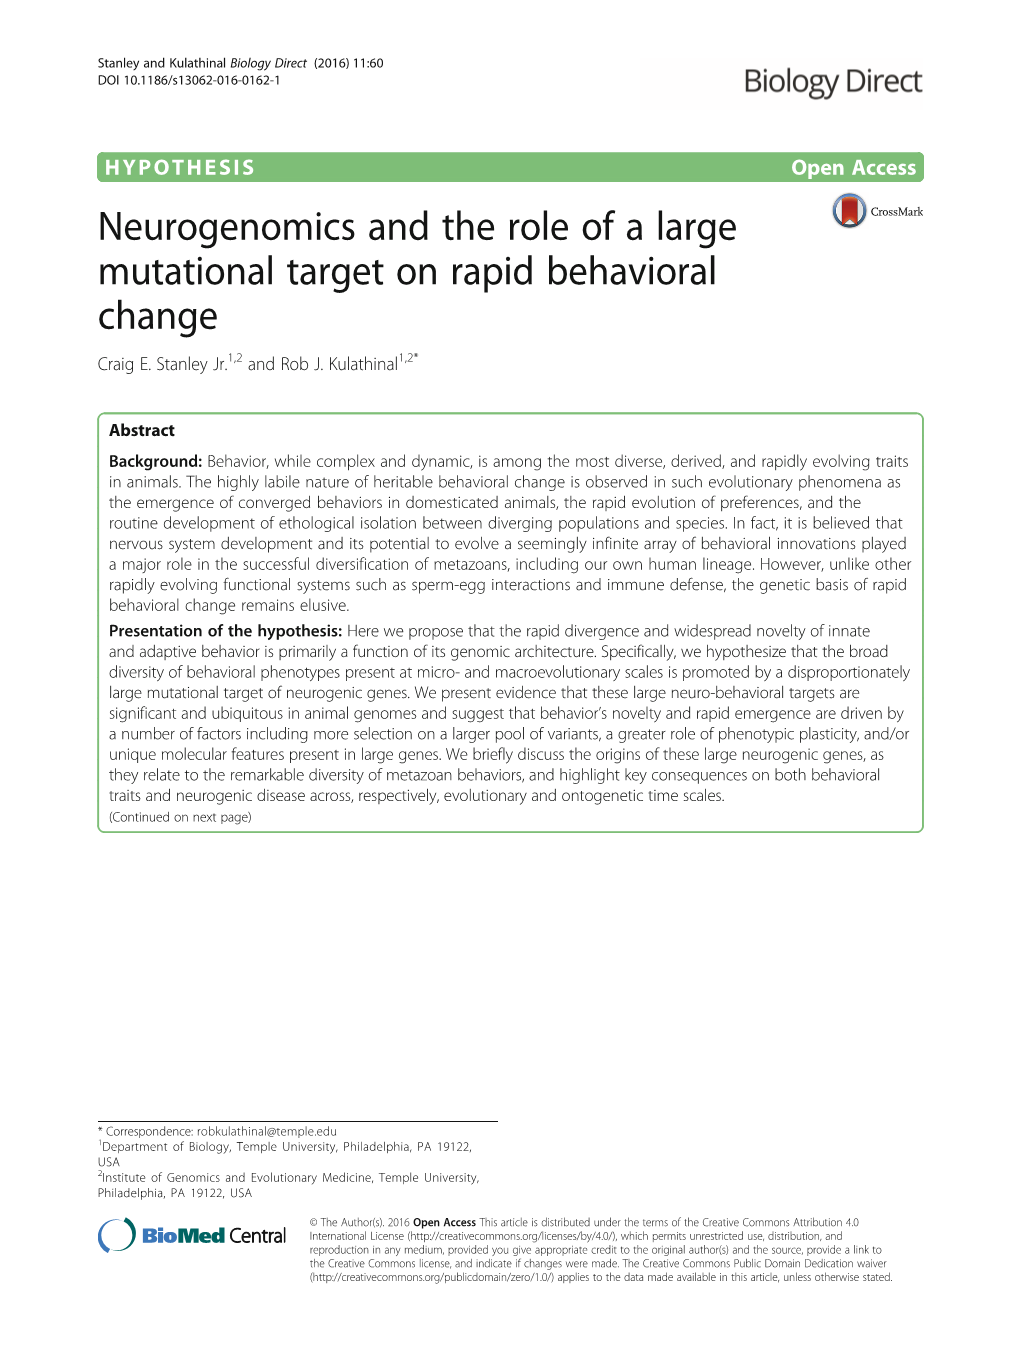 Neurogenomics and the Role of a Large Mutational Target on Rapid Behavioral Change Craig E